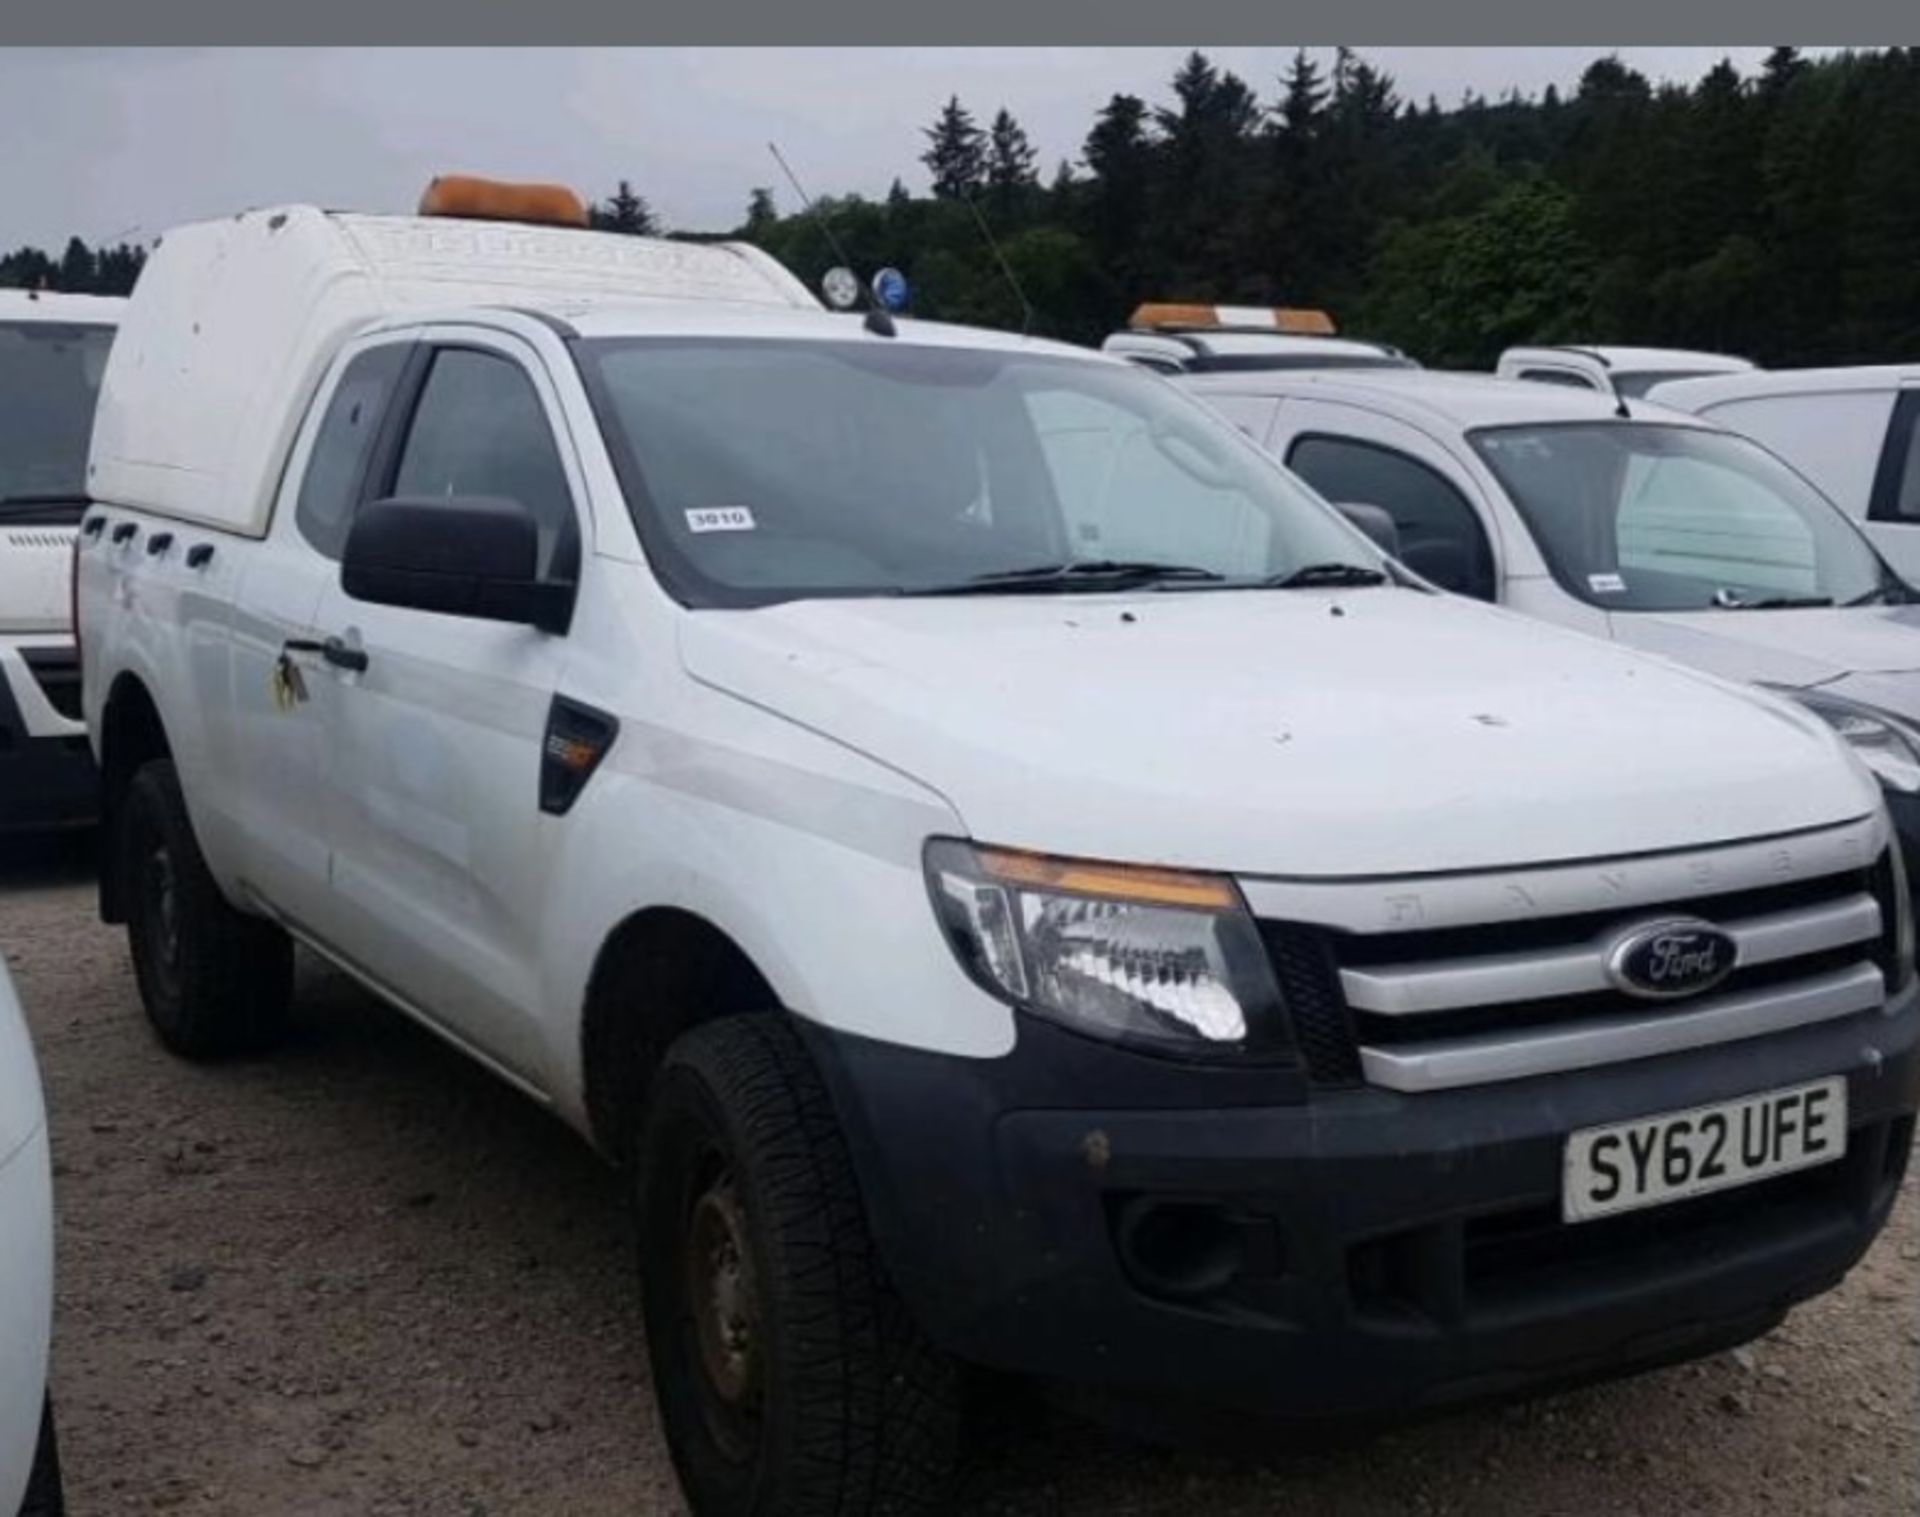 *COUNCIL DIRECT* 2012 FORD RANGER PICK UP TRUCK *LOCATION NORTH YORKSHIRE* - Image 2 of 2